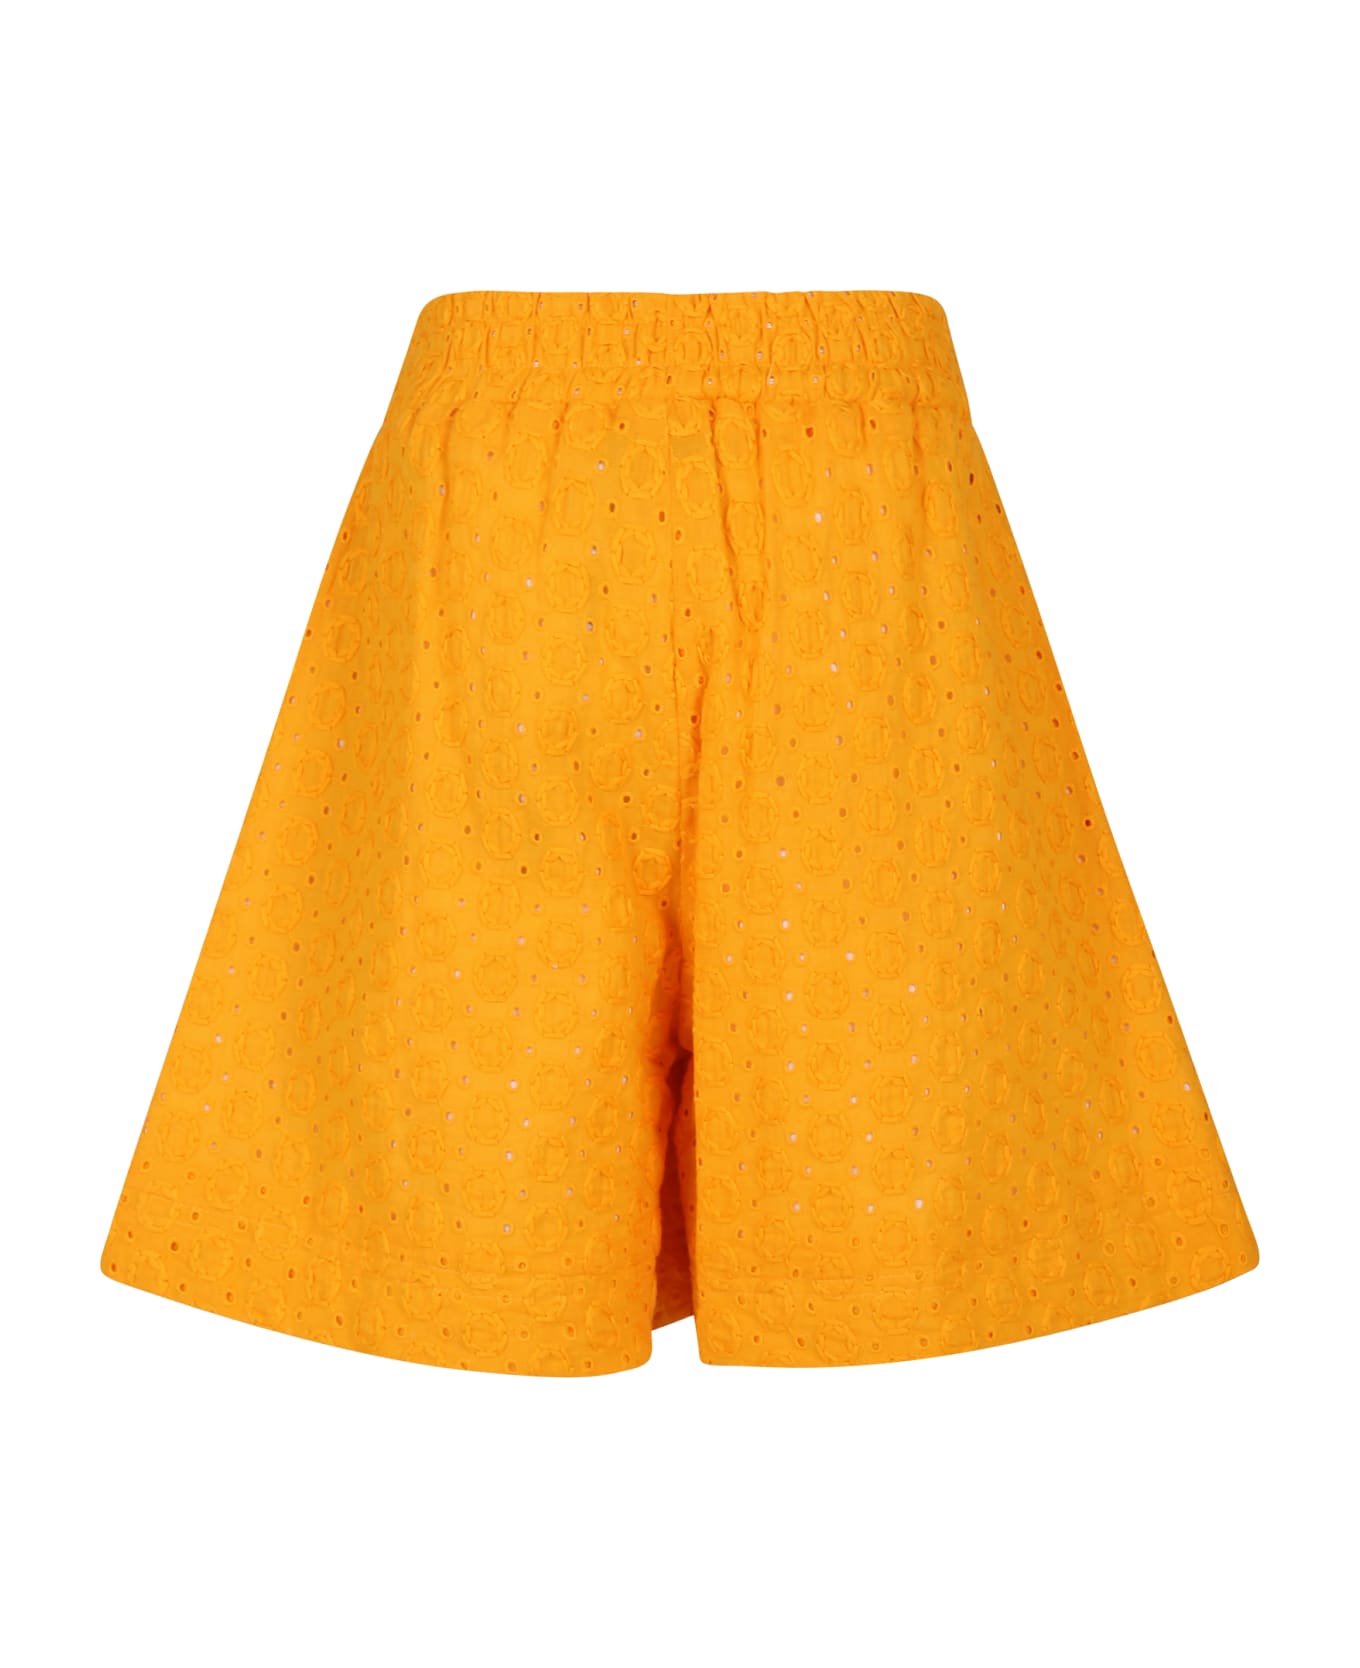 MSGM Orange Short For Girl With Broderie Anglaise - Orange